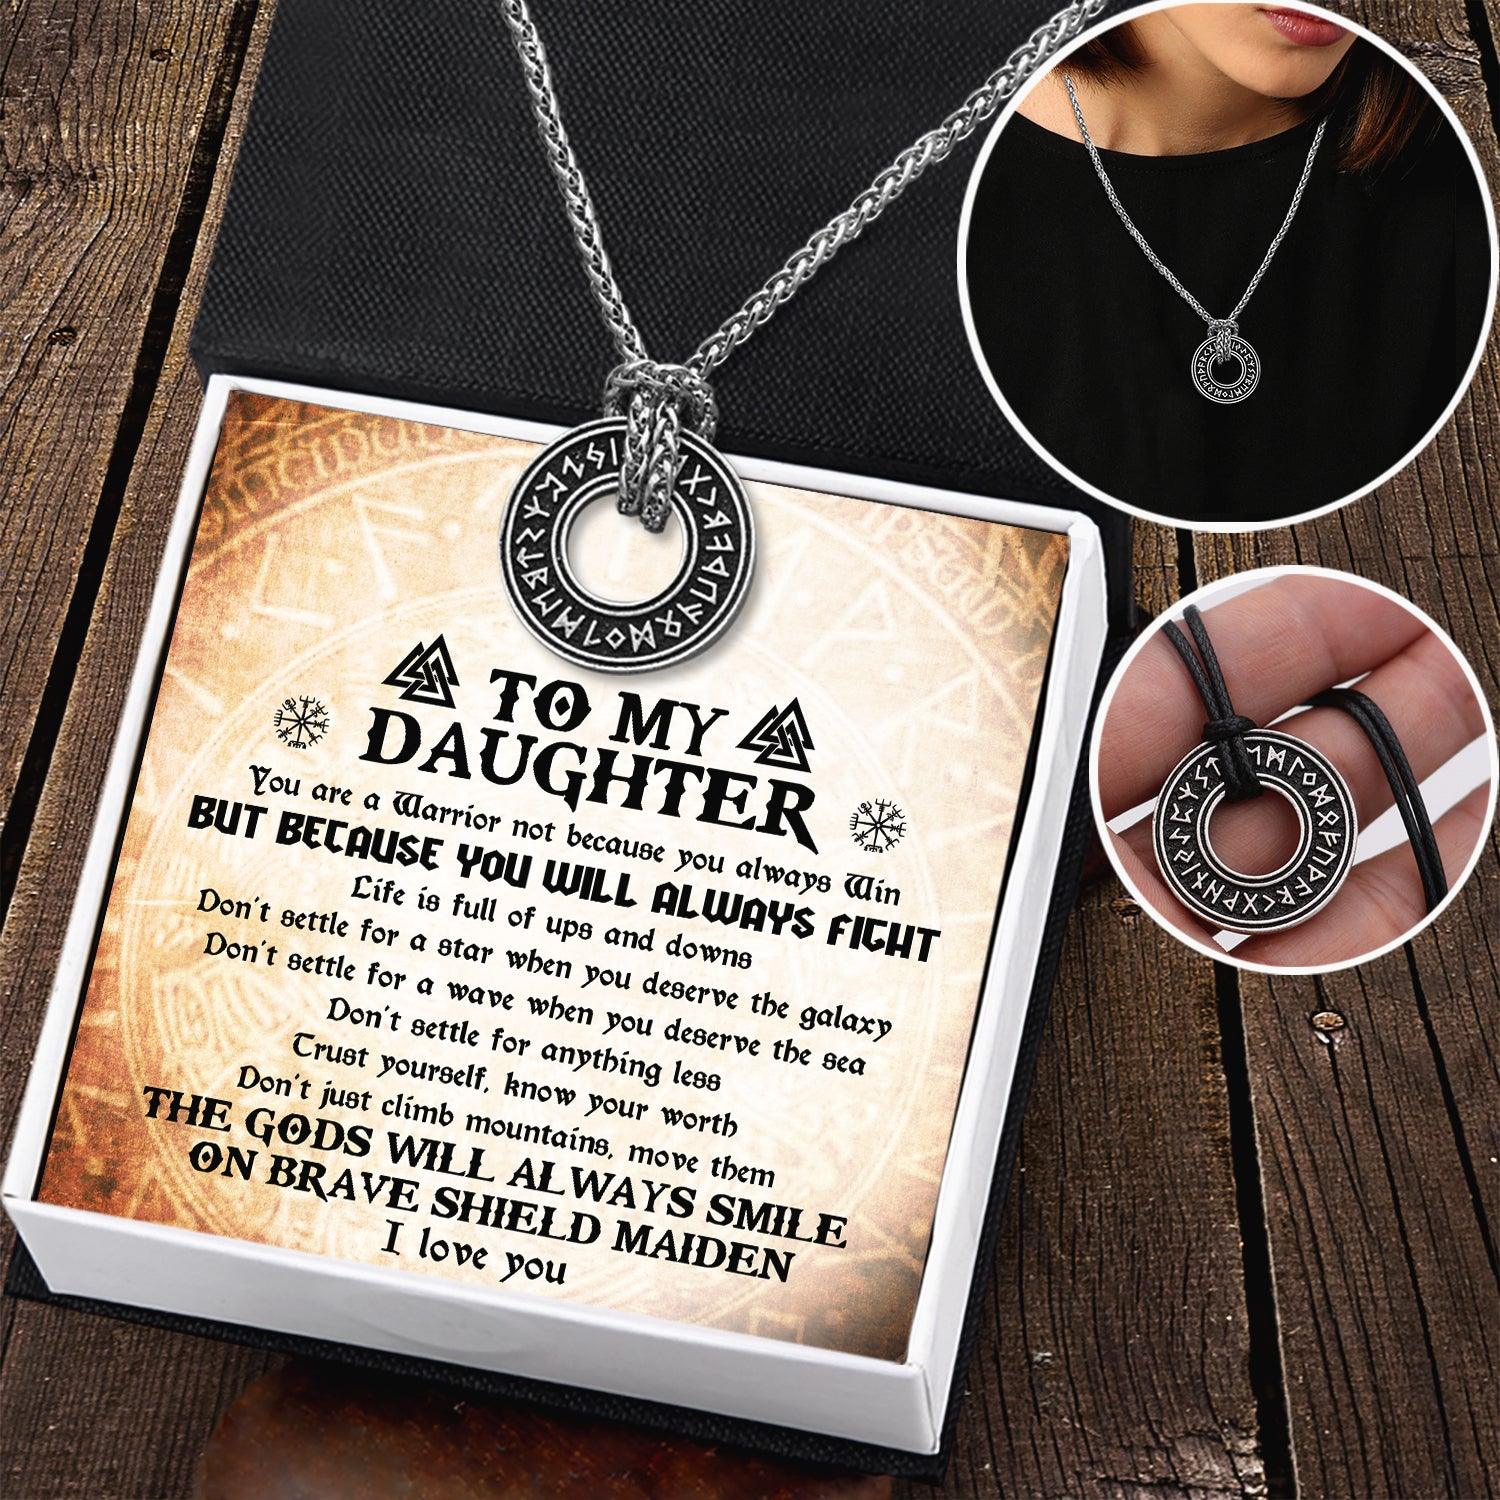 Viking Rune Necklace - Viking - To My Daughter - Trust Yourself, Know Your Worth - Augndy17001 - Gifts Holder